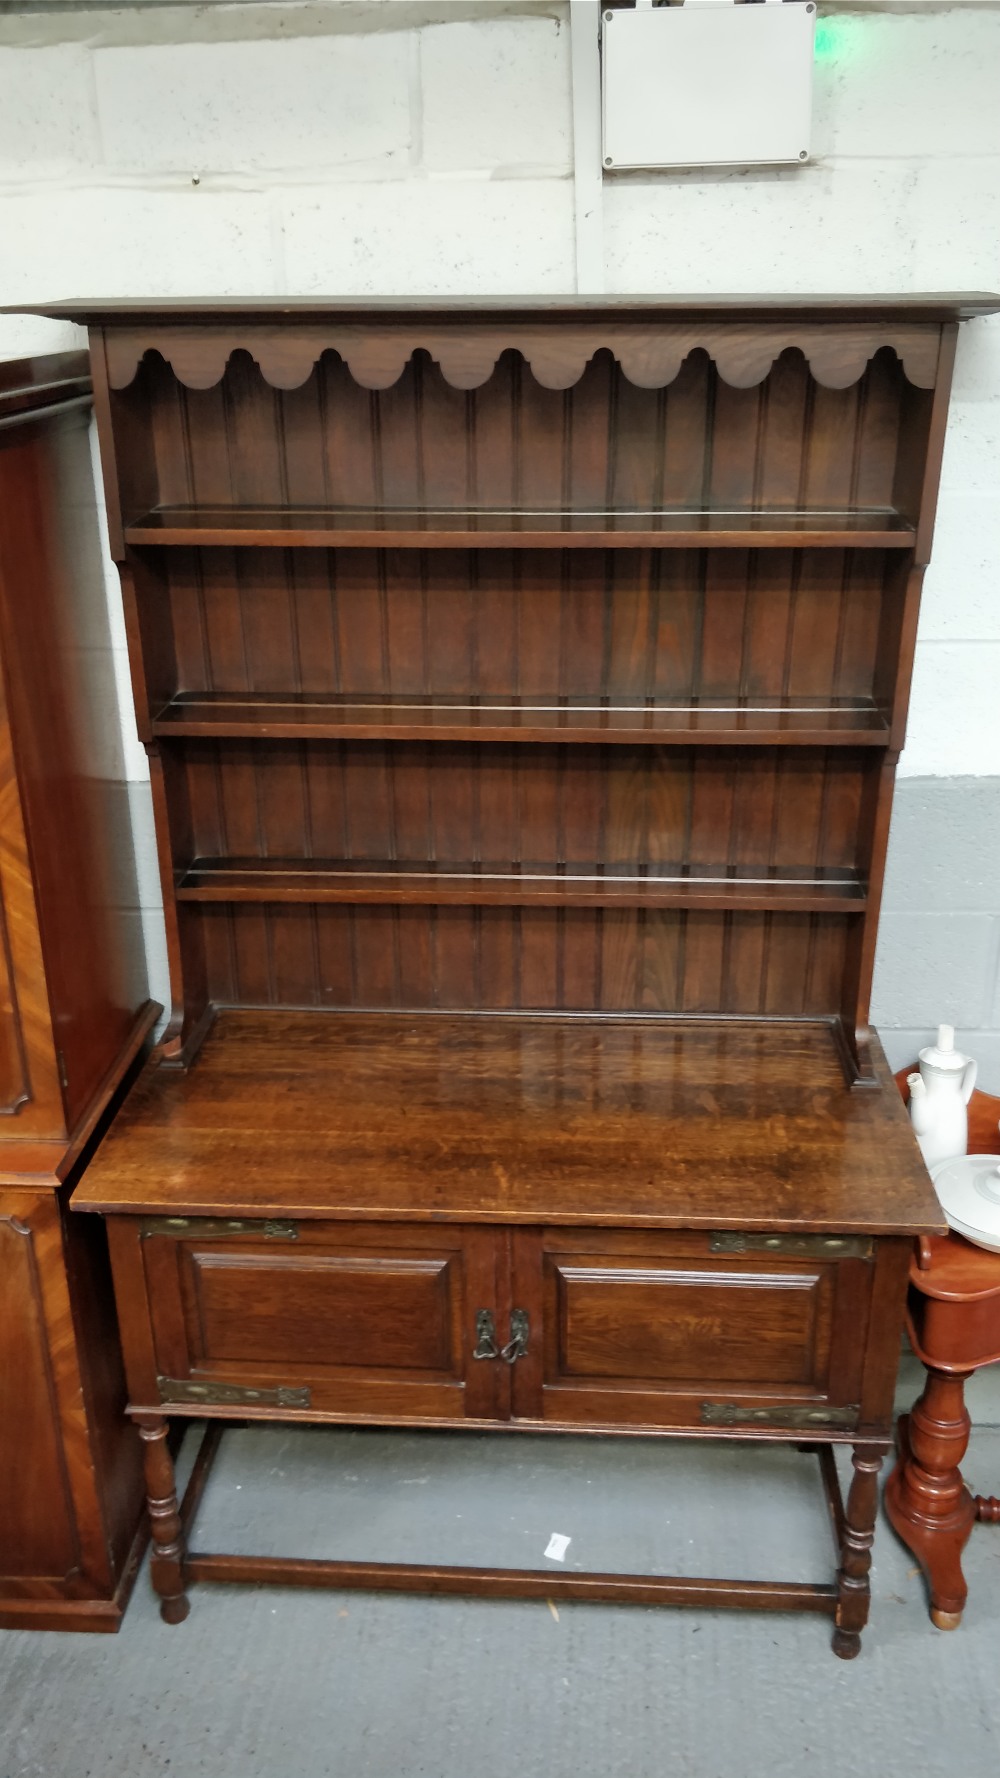 An Art Nouveau oak dresser, with fitted copper mounts and panelled top section, 205cm high, 122cm